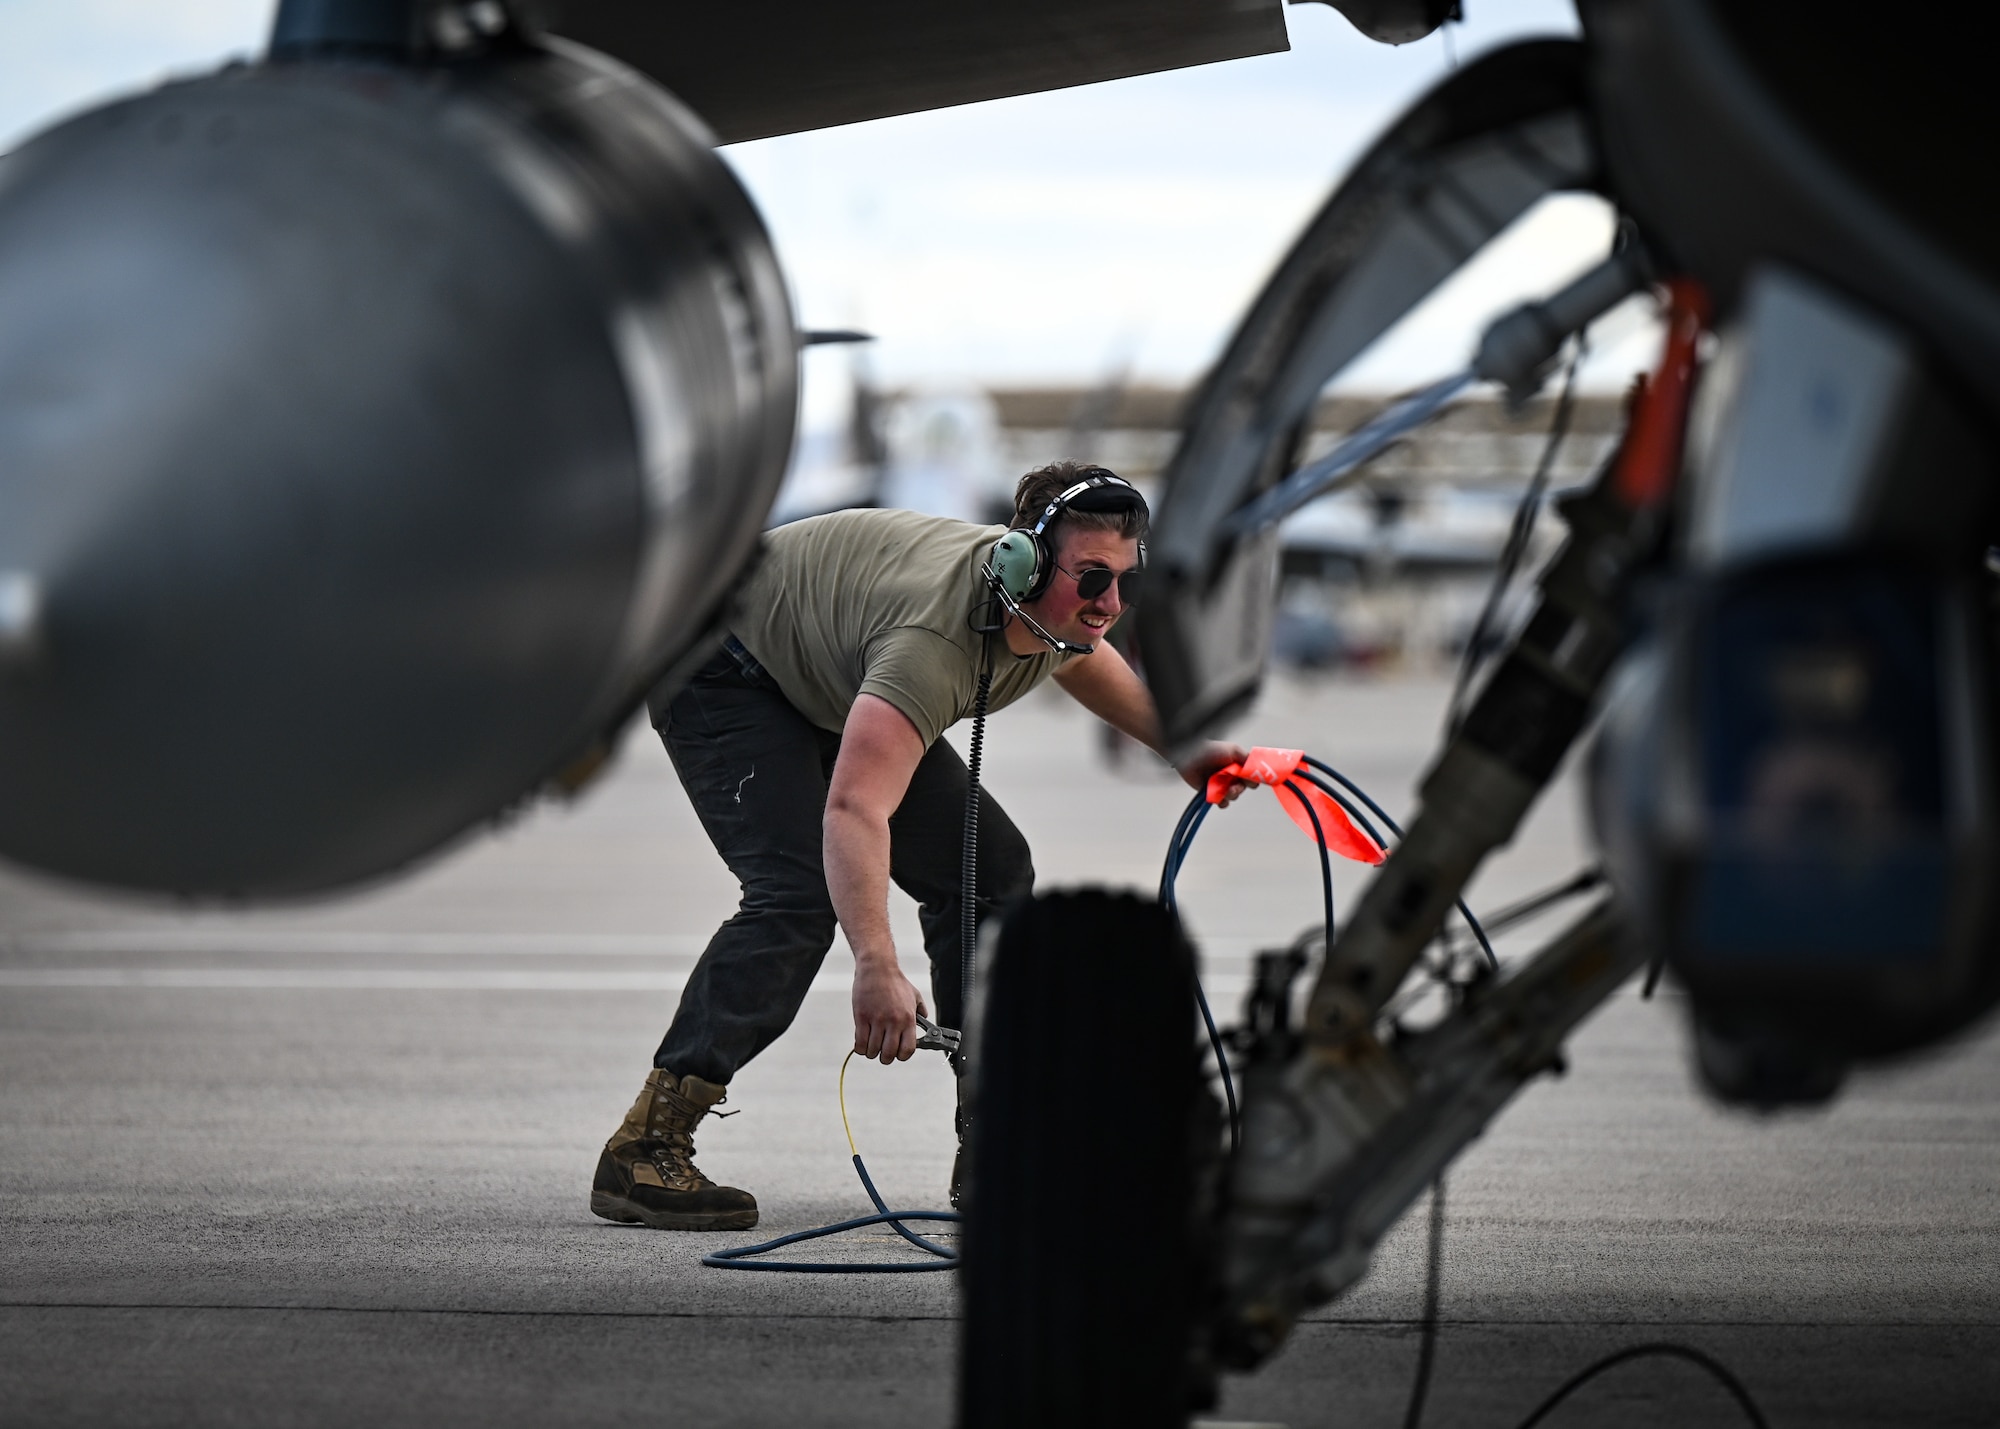 U.S. Air Force Airman Thomas Blazina, 55th Fighter Generation Squadron assistant dedicated crew chief, performs pre-flight checks during exercise Red Flag-Nellis (RF-N) 23-2 at Nellis Air Force Base, Nevada, March 15, 2023. The 20th Maintenance Group is a vital component to the Wild Weasel mission, and the Airmen involved in supporting RF-N 23-2 are critical to delivering combat airpower and ensuring the 20th Fighter Wing aircrew receive world-class training. (U.S. Air Force photo by Staff Sgt. Madeline Herzog)